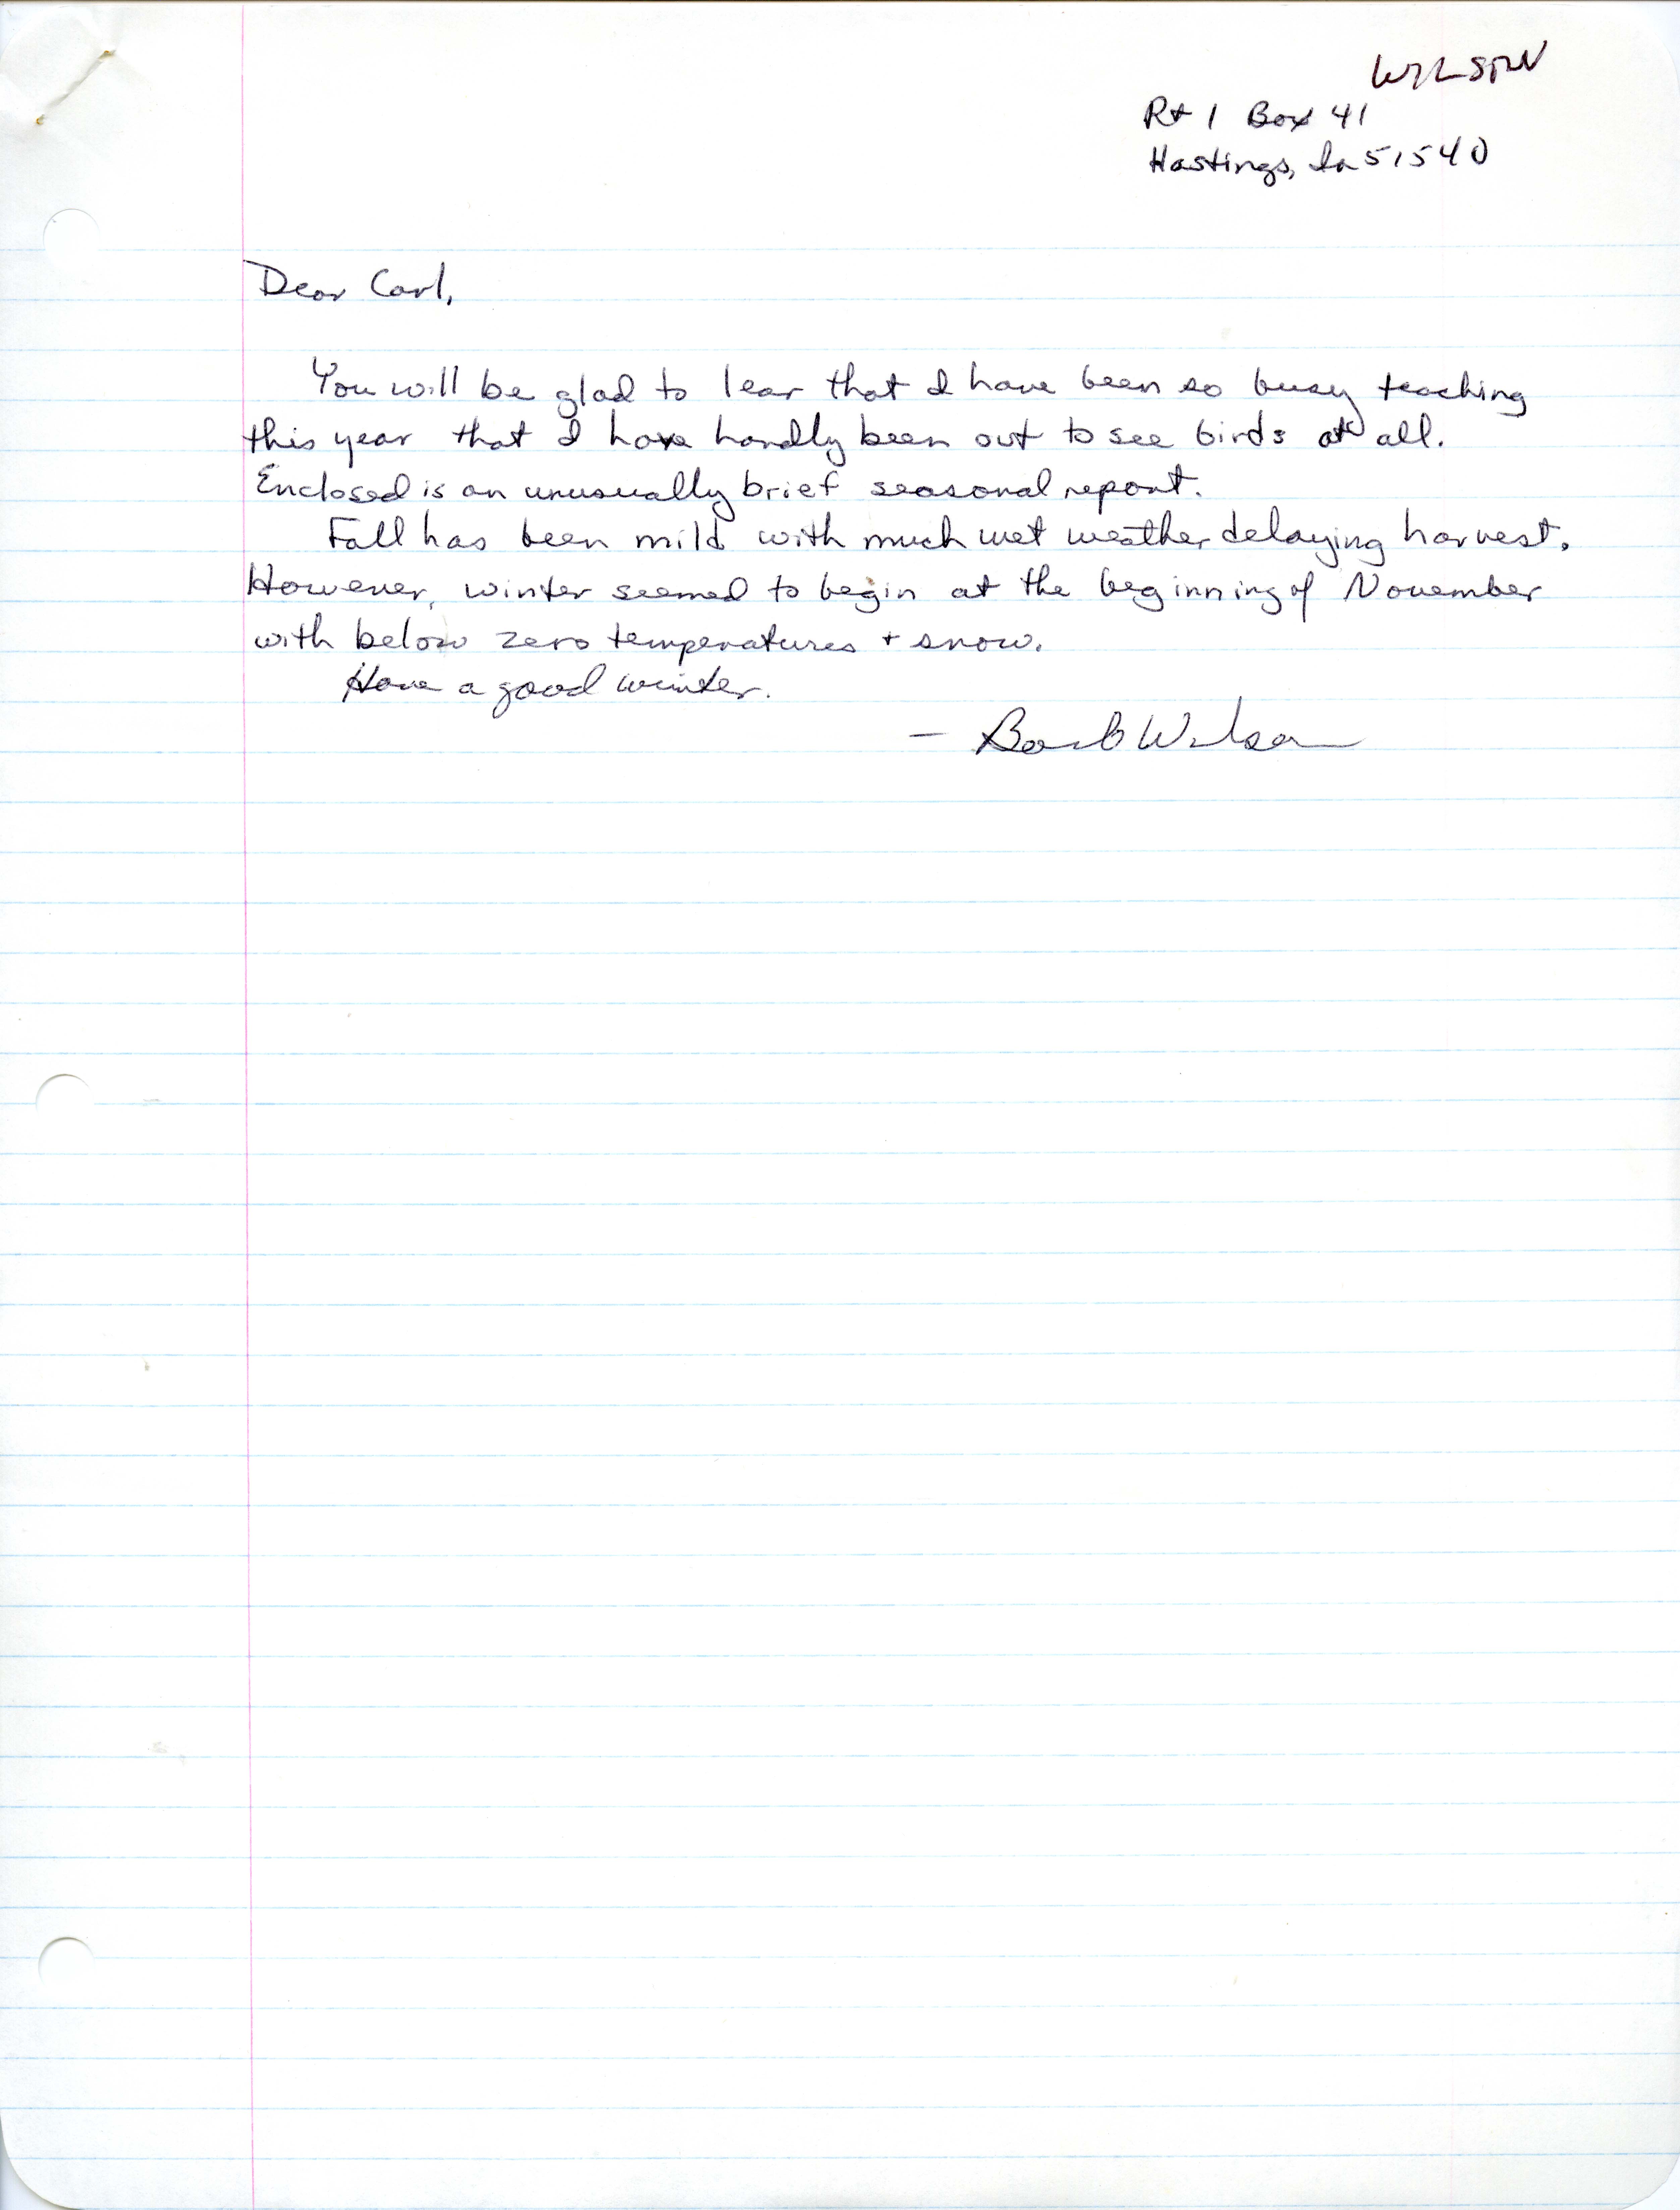 Field notes and Barbara L. Wilson letter to Carl J. Bendorf, fall 1986